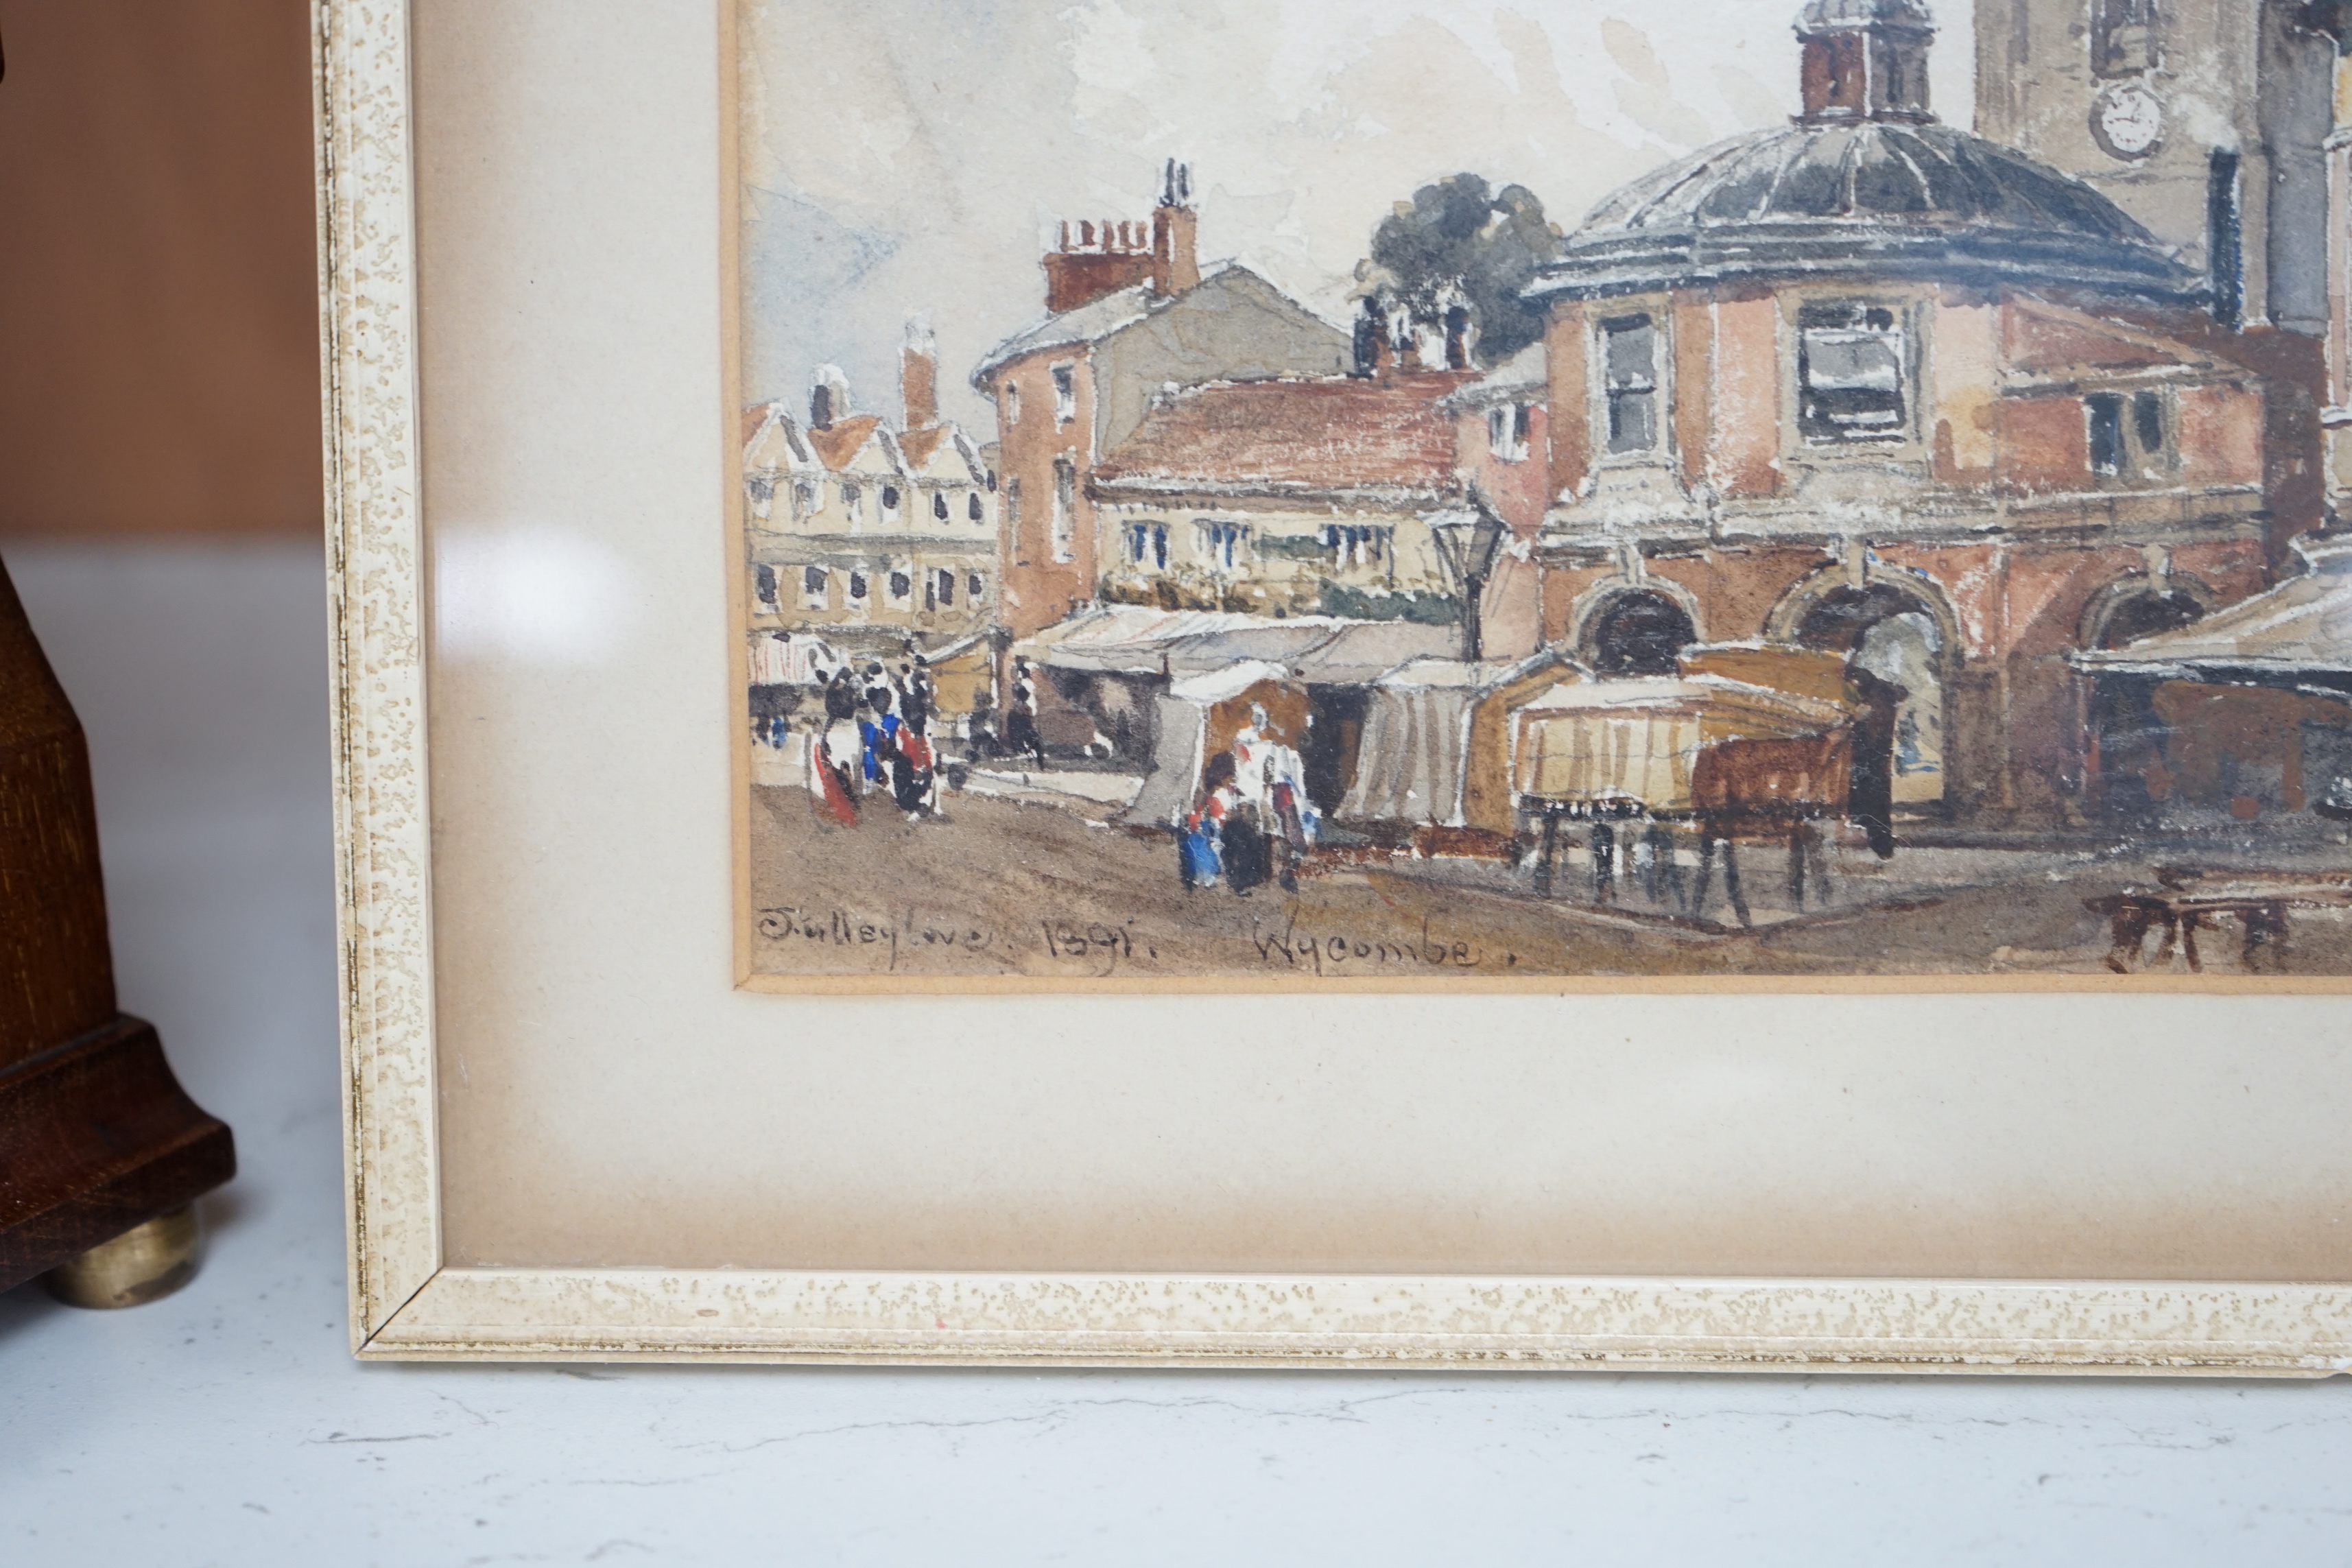 John Fulleylove (1845-1908), watercolour, ‘Wycombe’, signed and dated 1891, 12 x 17cm